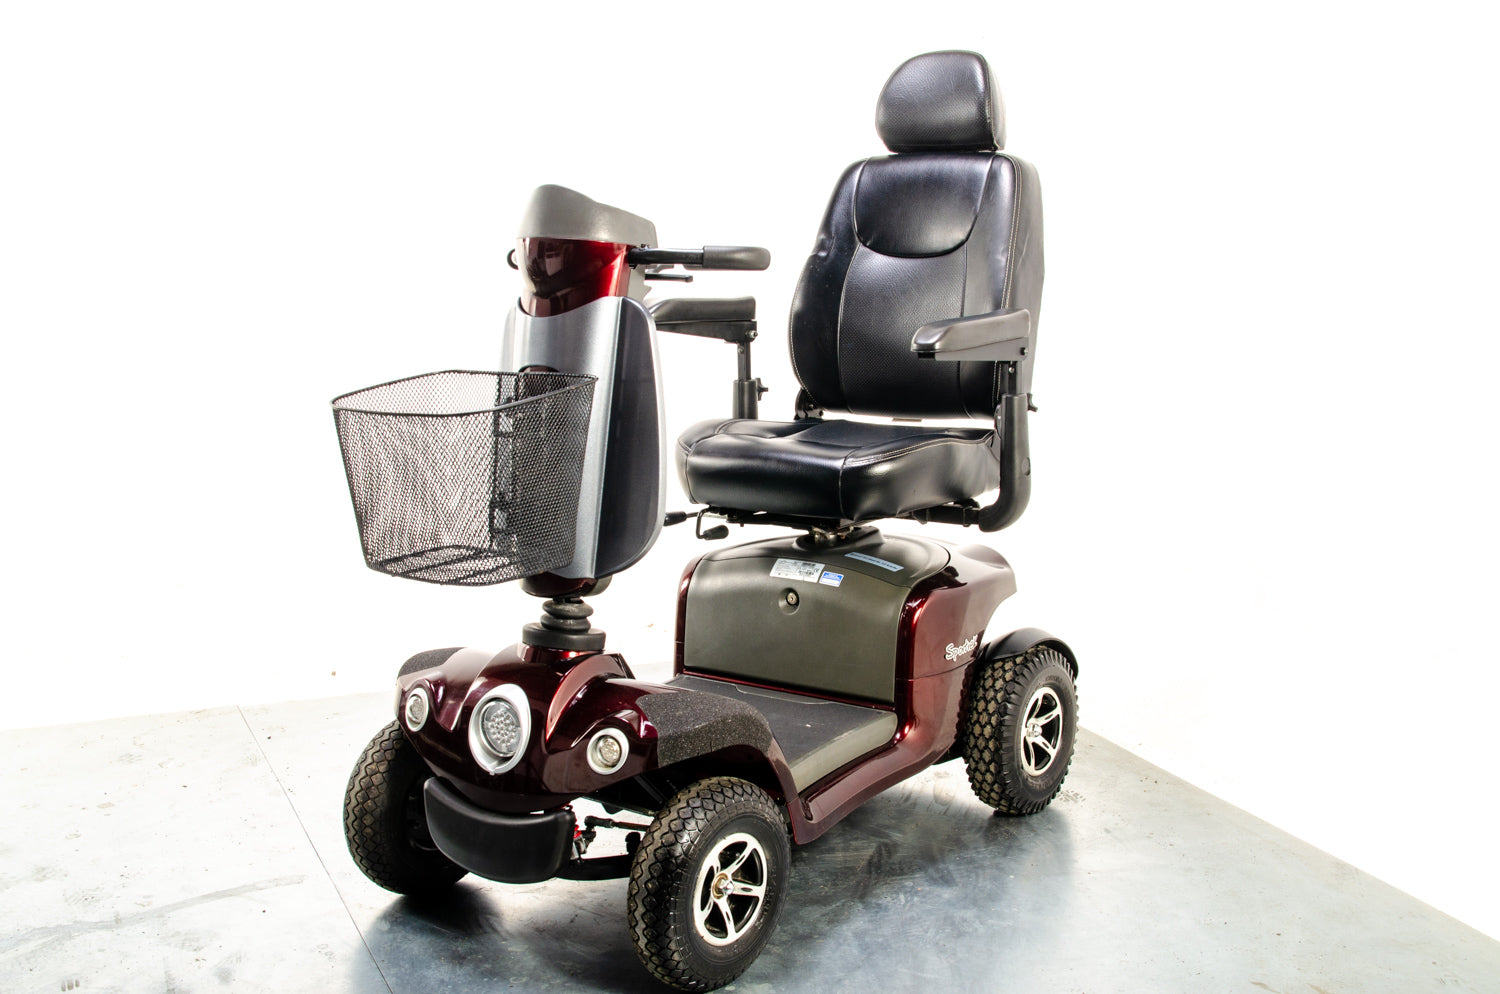 Excel Sportrek All-Terrain Off-Road Used Mobility Scooter 8mph Road Pneumatic Van Os Midsize Pavement 13369